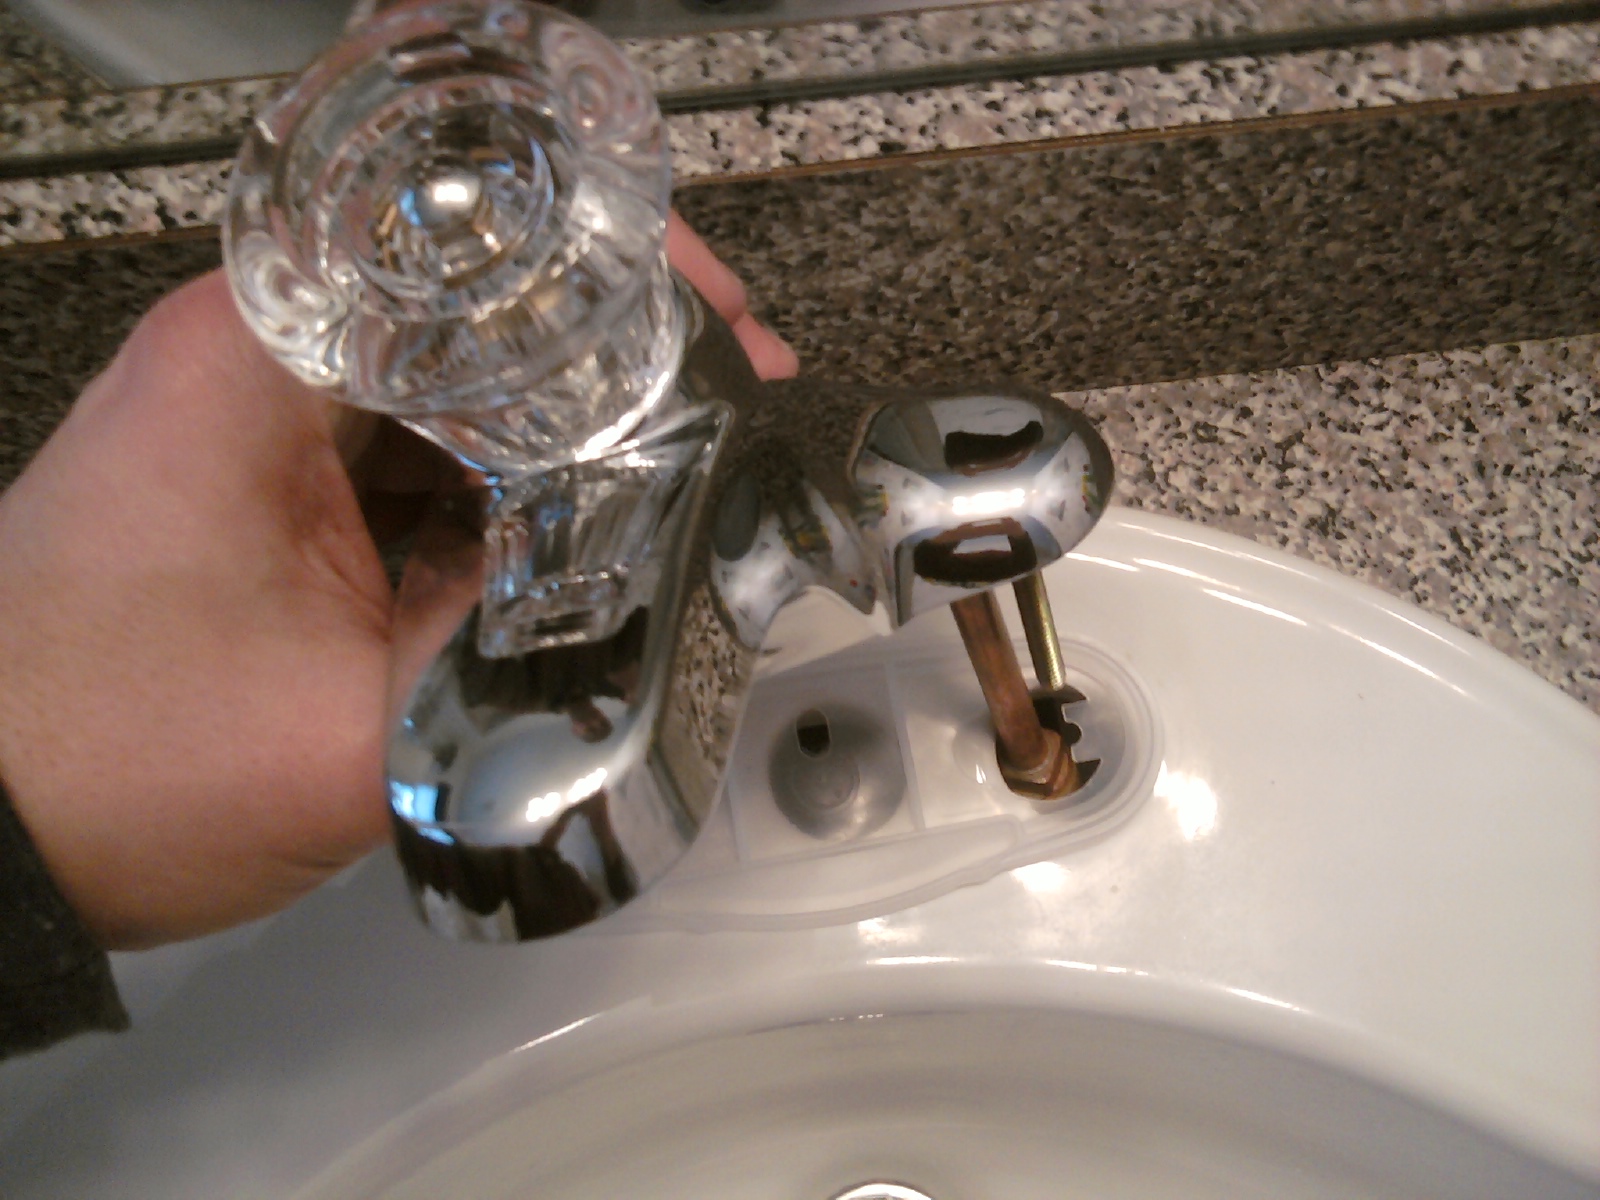 Positioning the New Bathroom Faucet for Installation